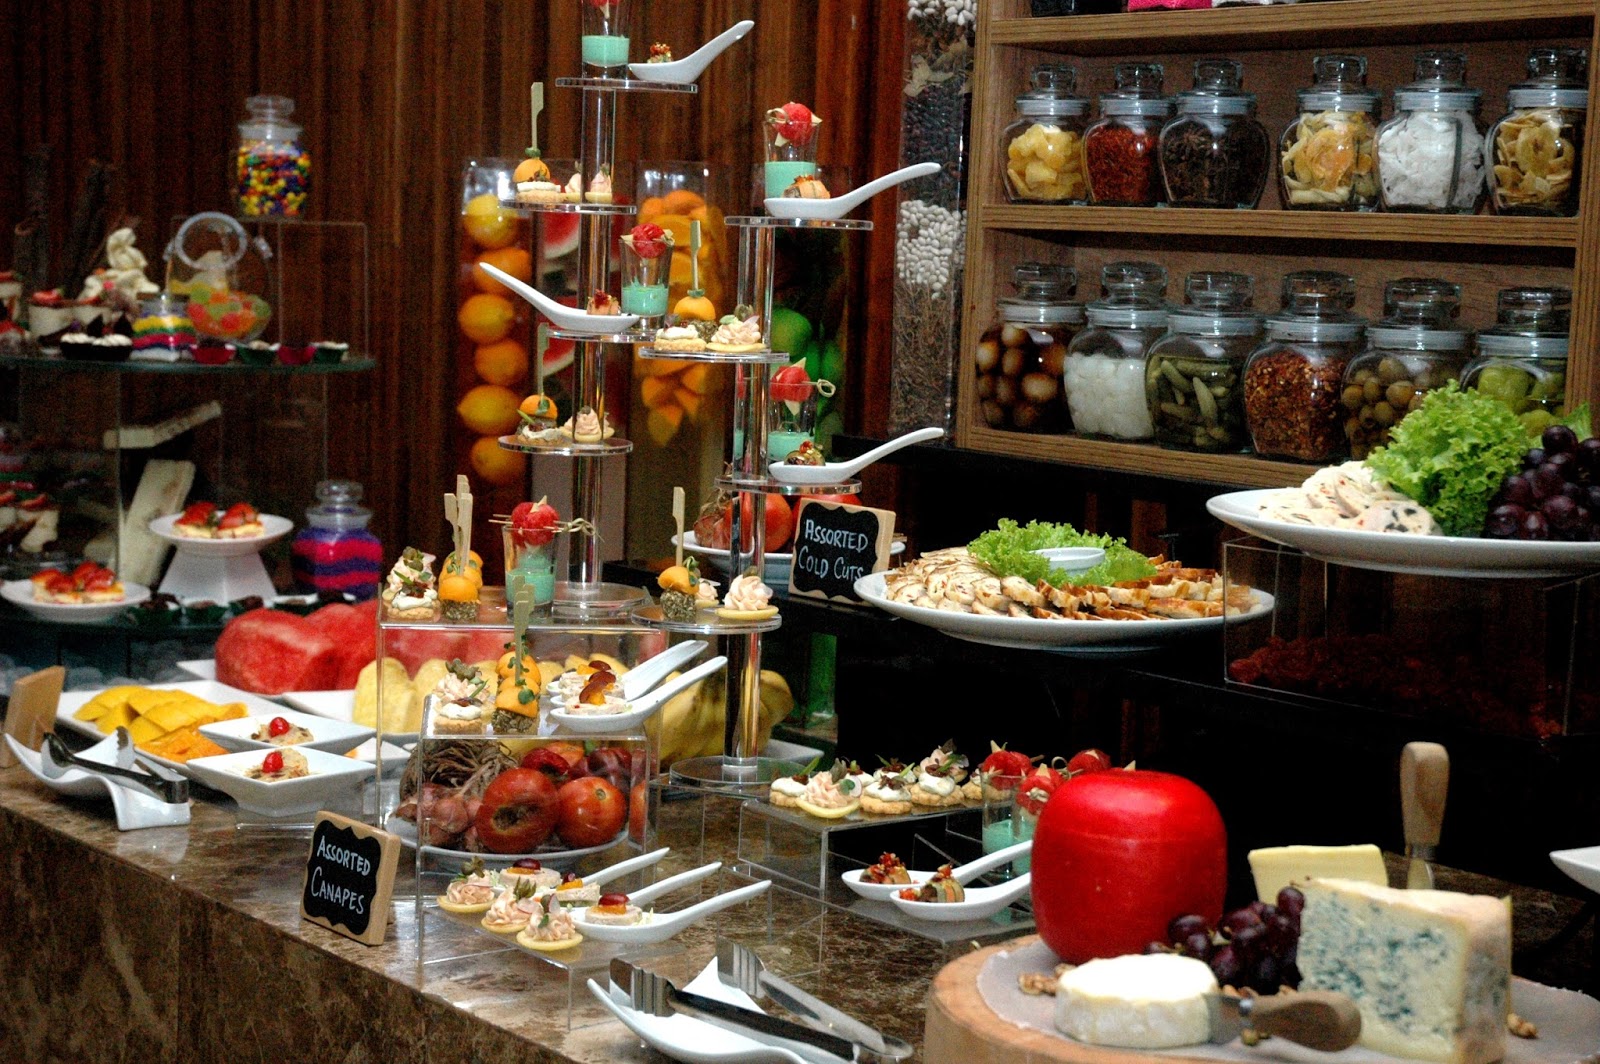 DUDE FOR FOOD: A Grand Lunch Buffet at City Garden Grand Hotel's Spice Cafe